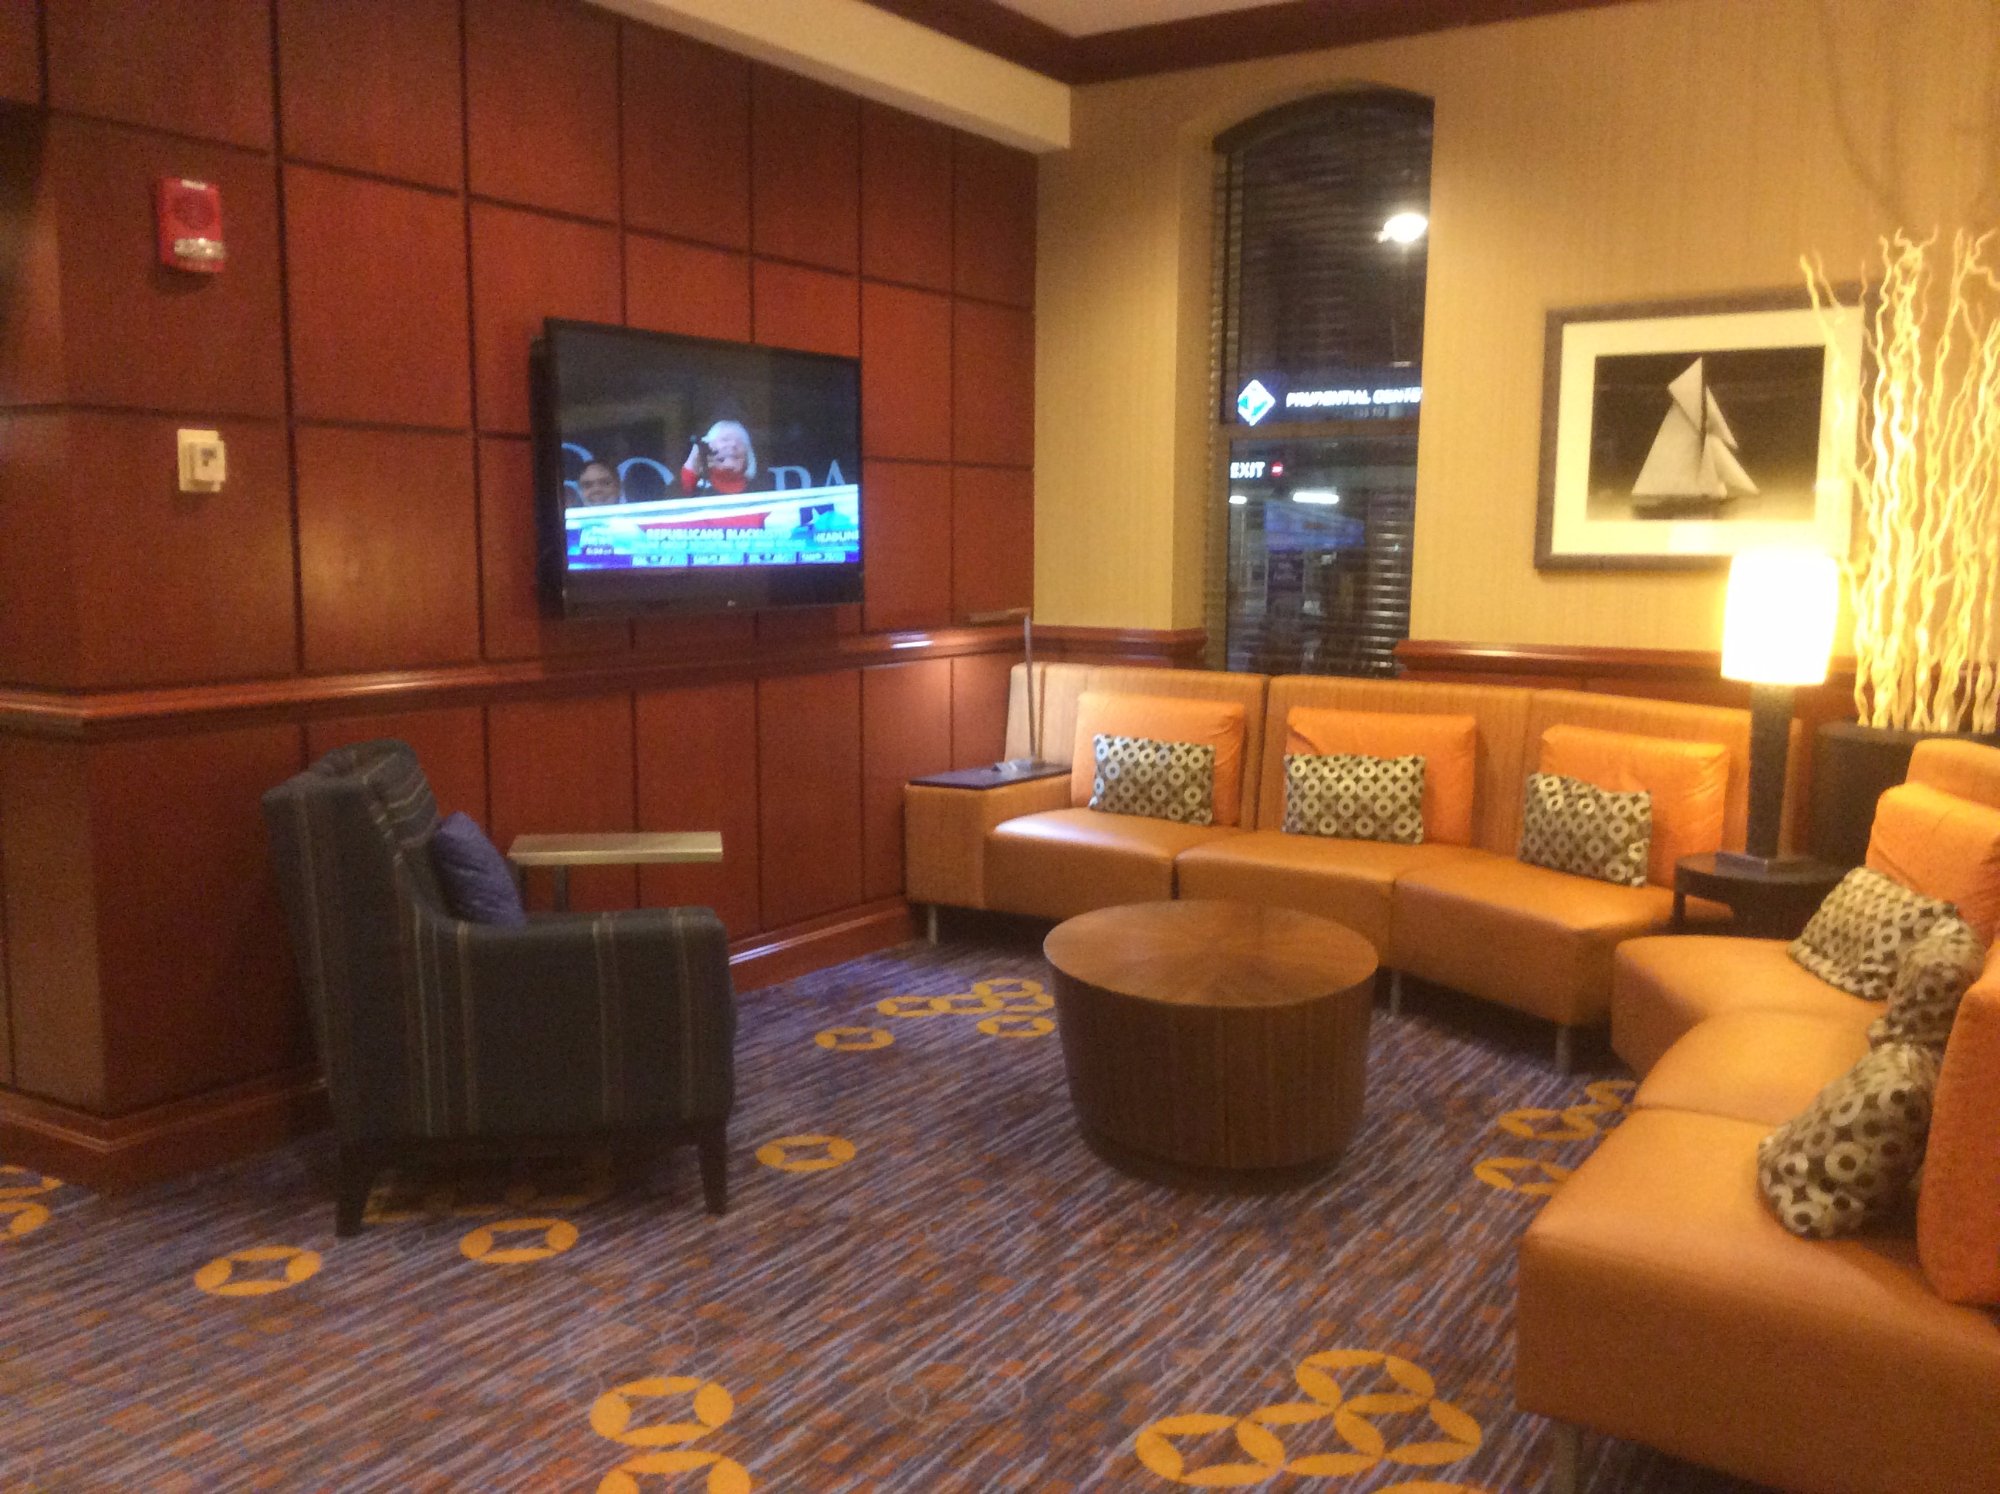 Hotel photo 15 of Courtyard by Marriott Boston Copley Square.